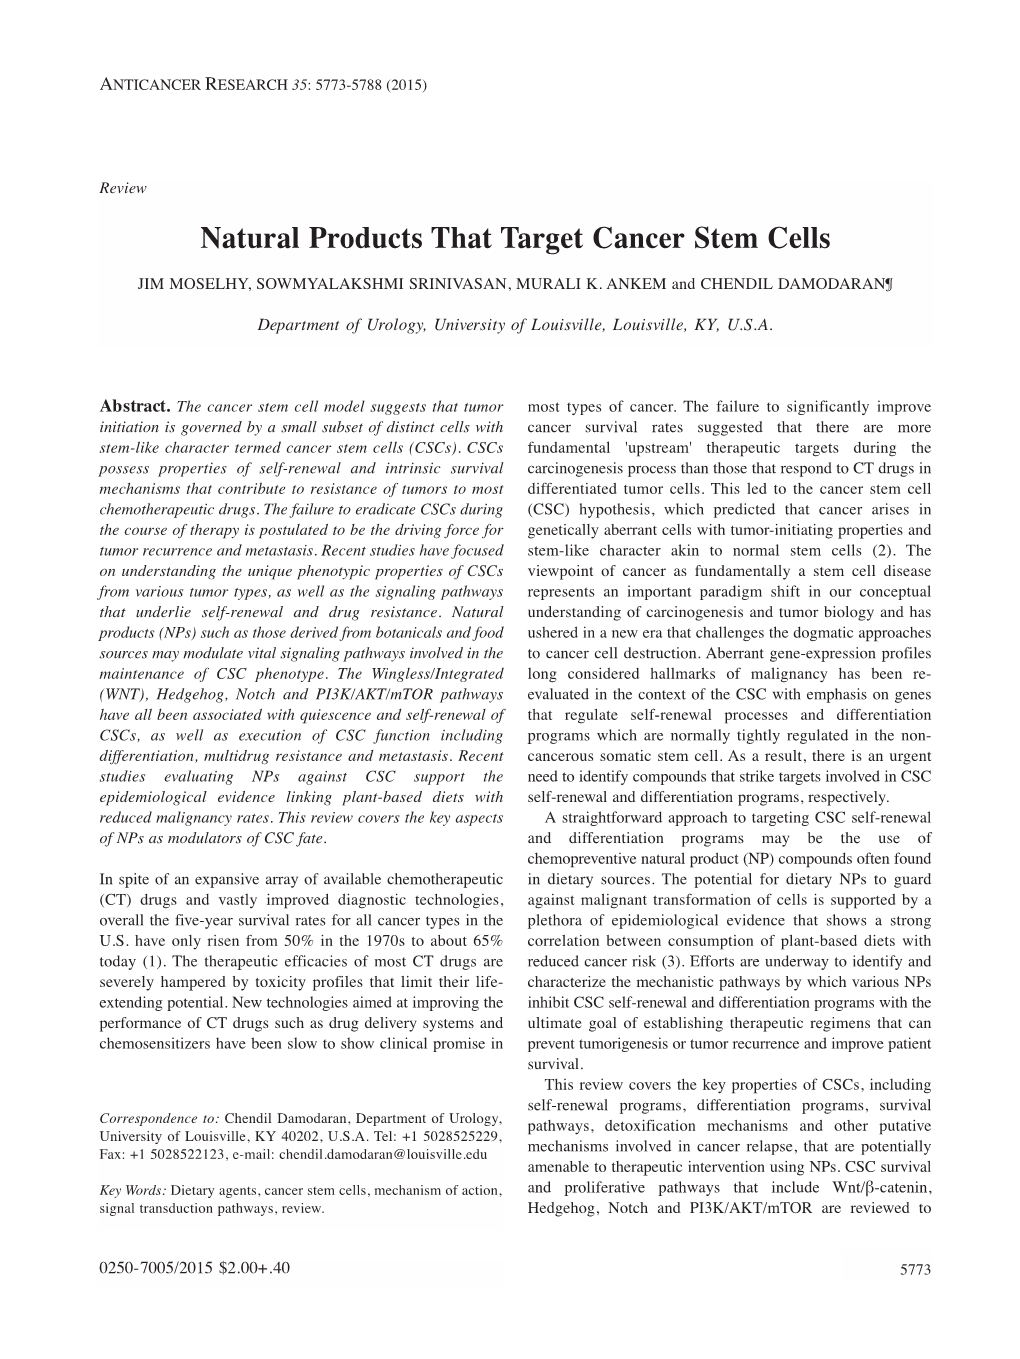 Natural Products That Target Cancer Stem Cells